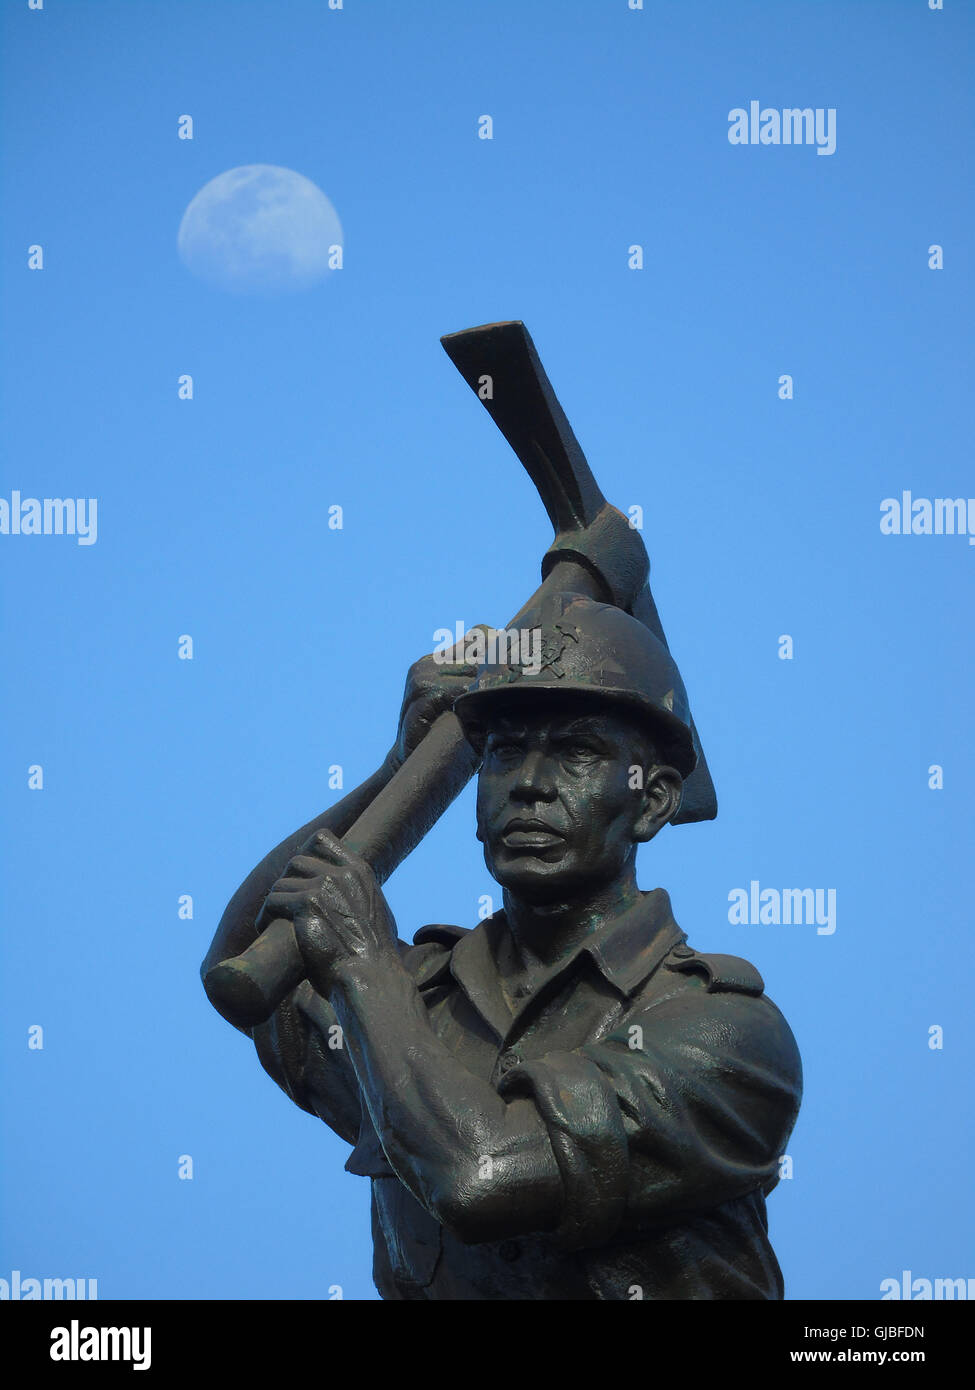 Miner statue with moon background on August 14, 2016 in Bintan island, Indonesia. Photo by Yuli Seperi Stock Photo